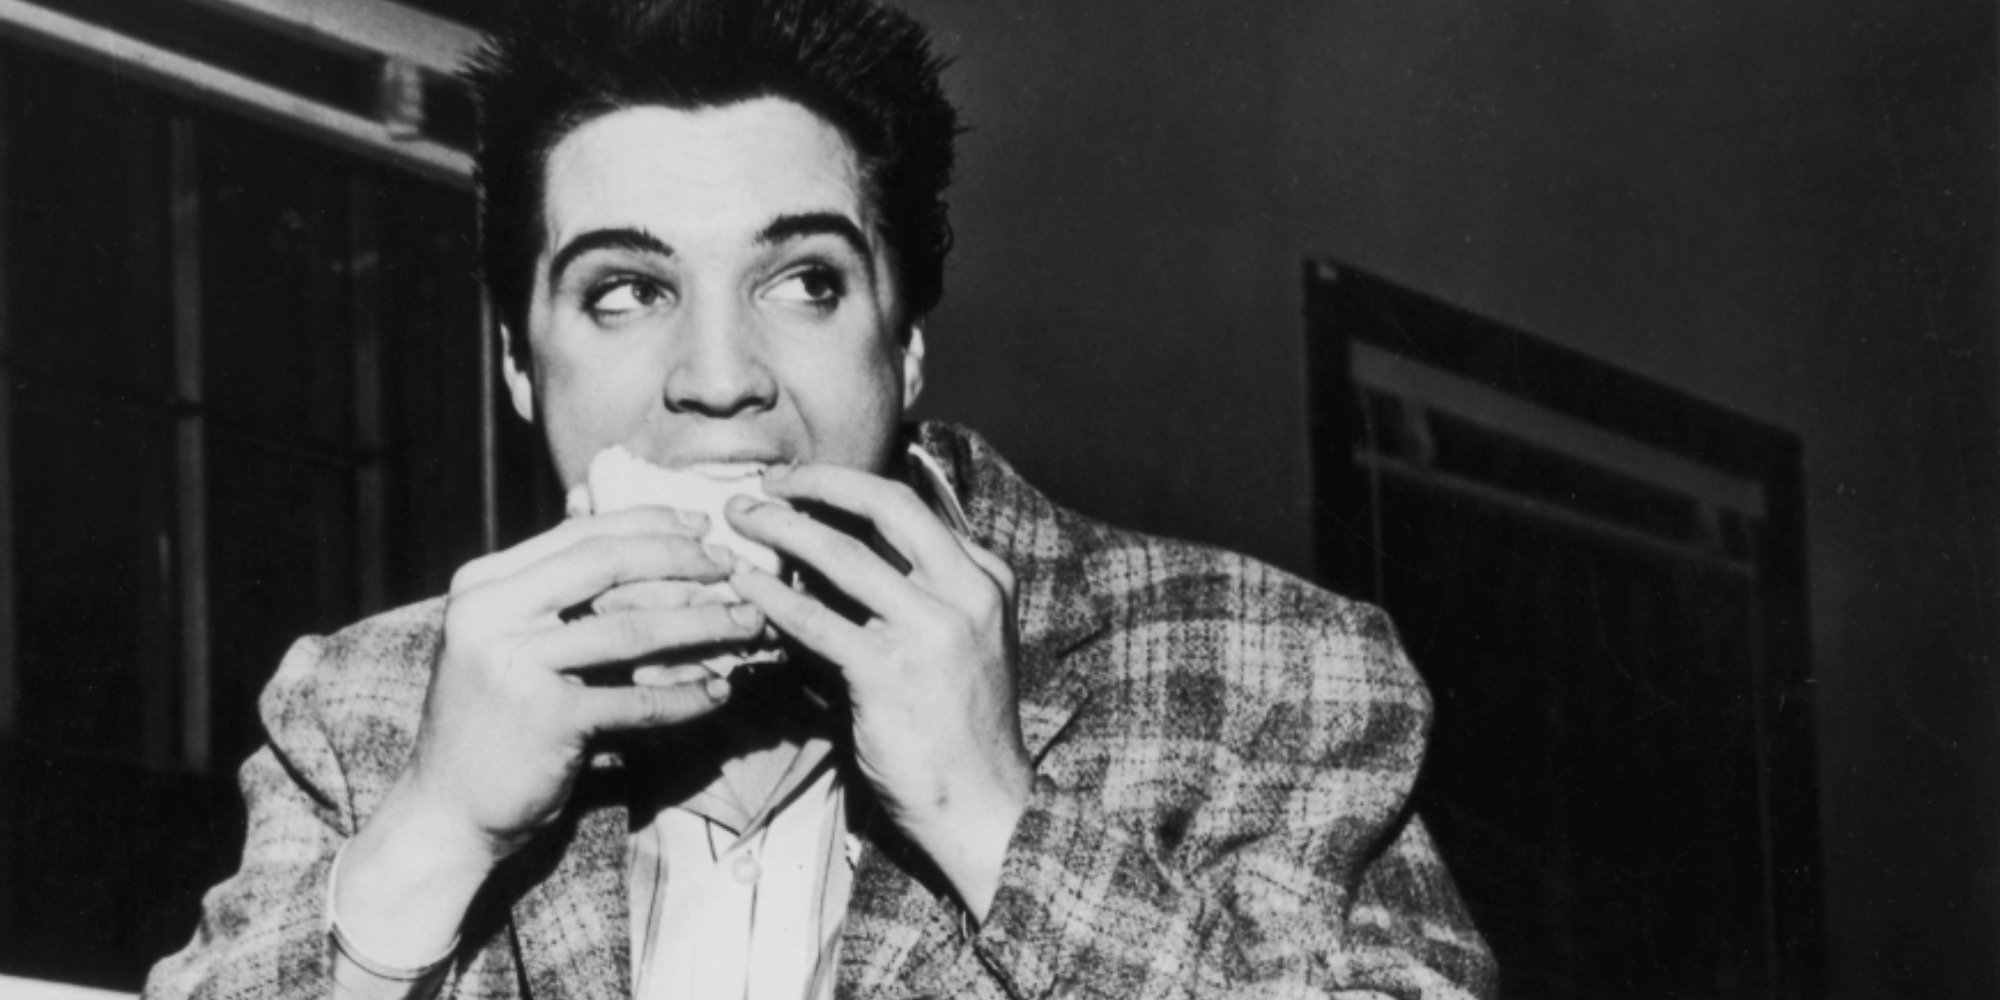 Elvis Presley enjoys a sandwich in a black and white photo.